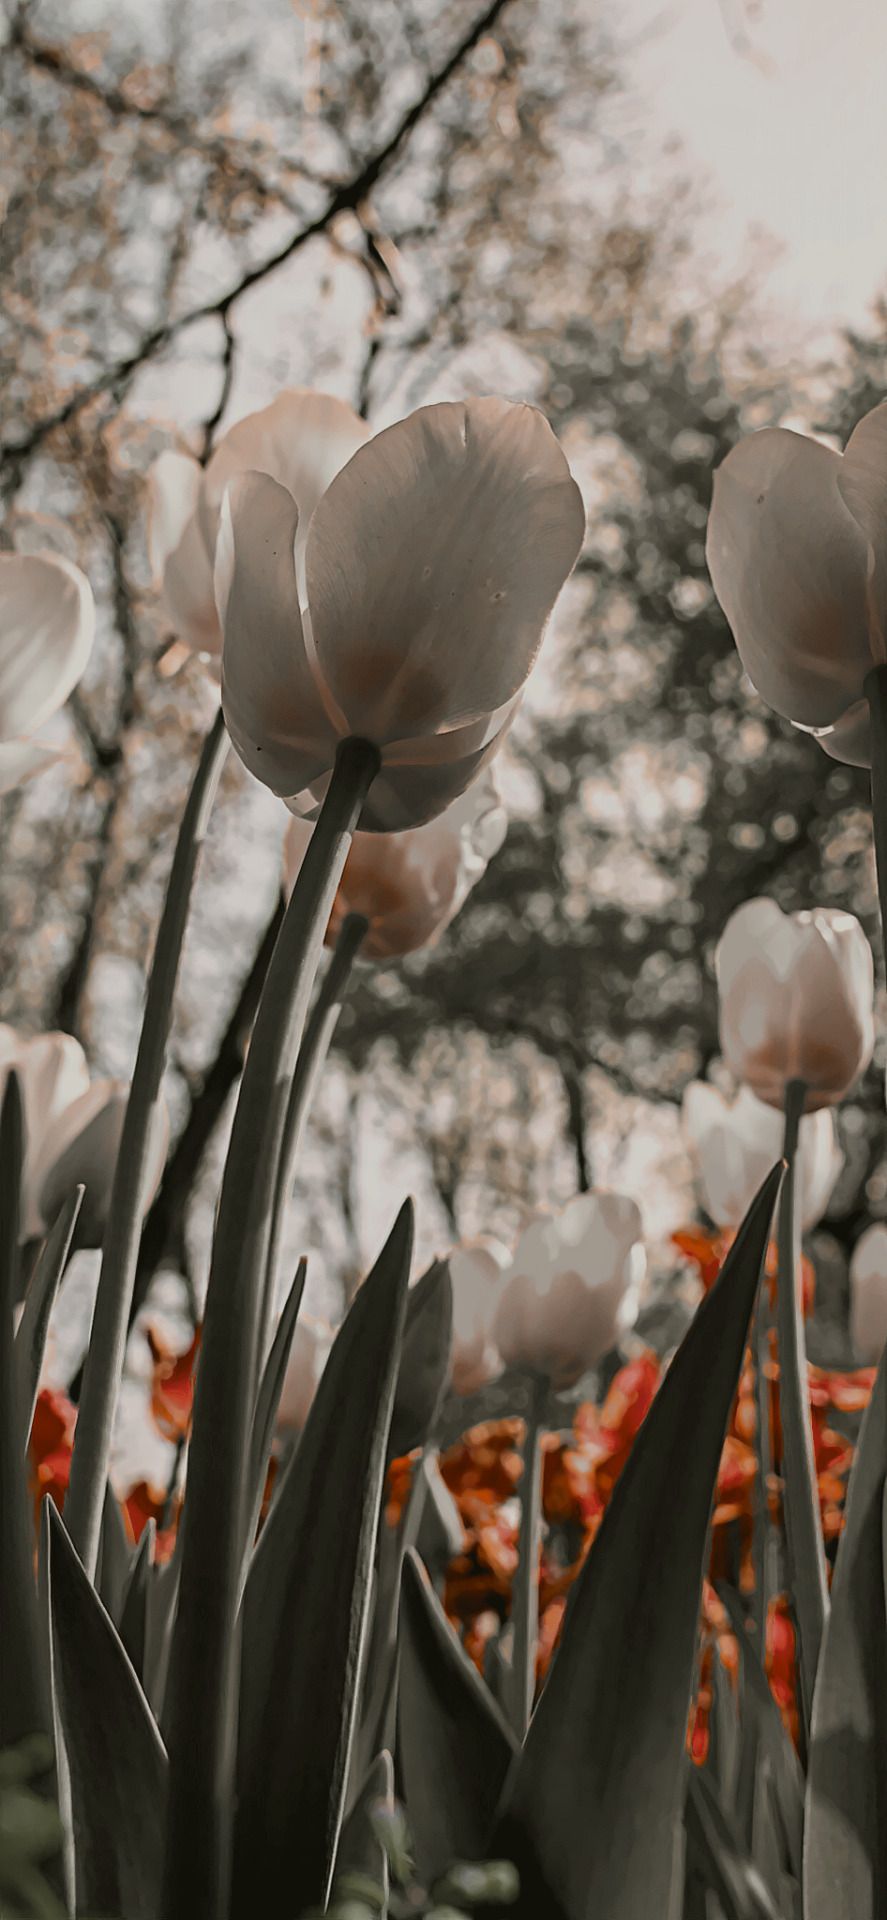 A field of white tulips with a blurred background - Cottagecore, tulip